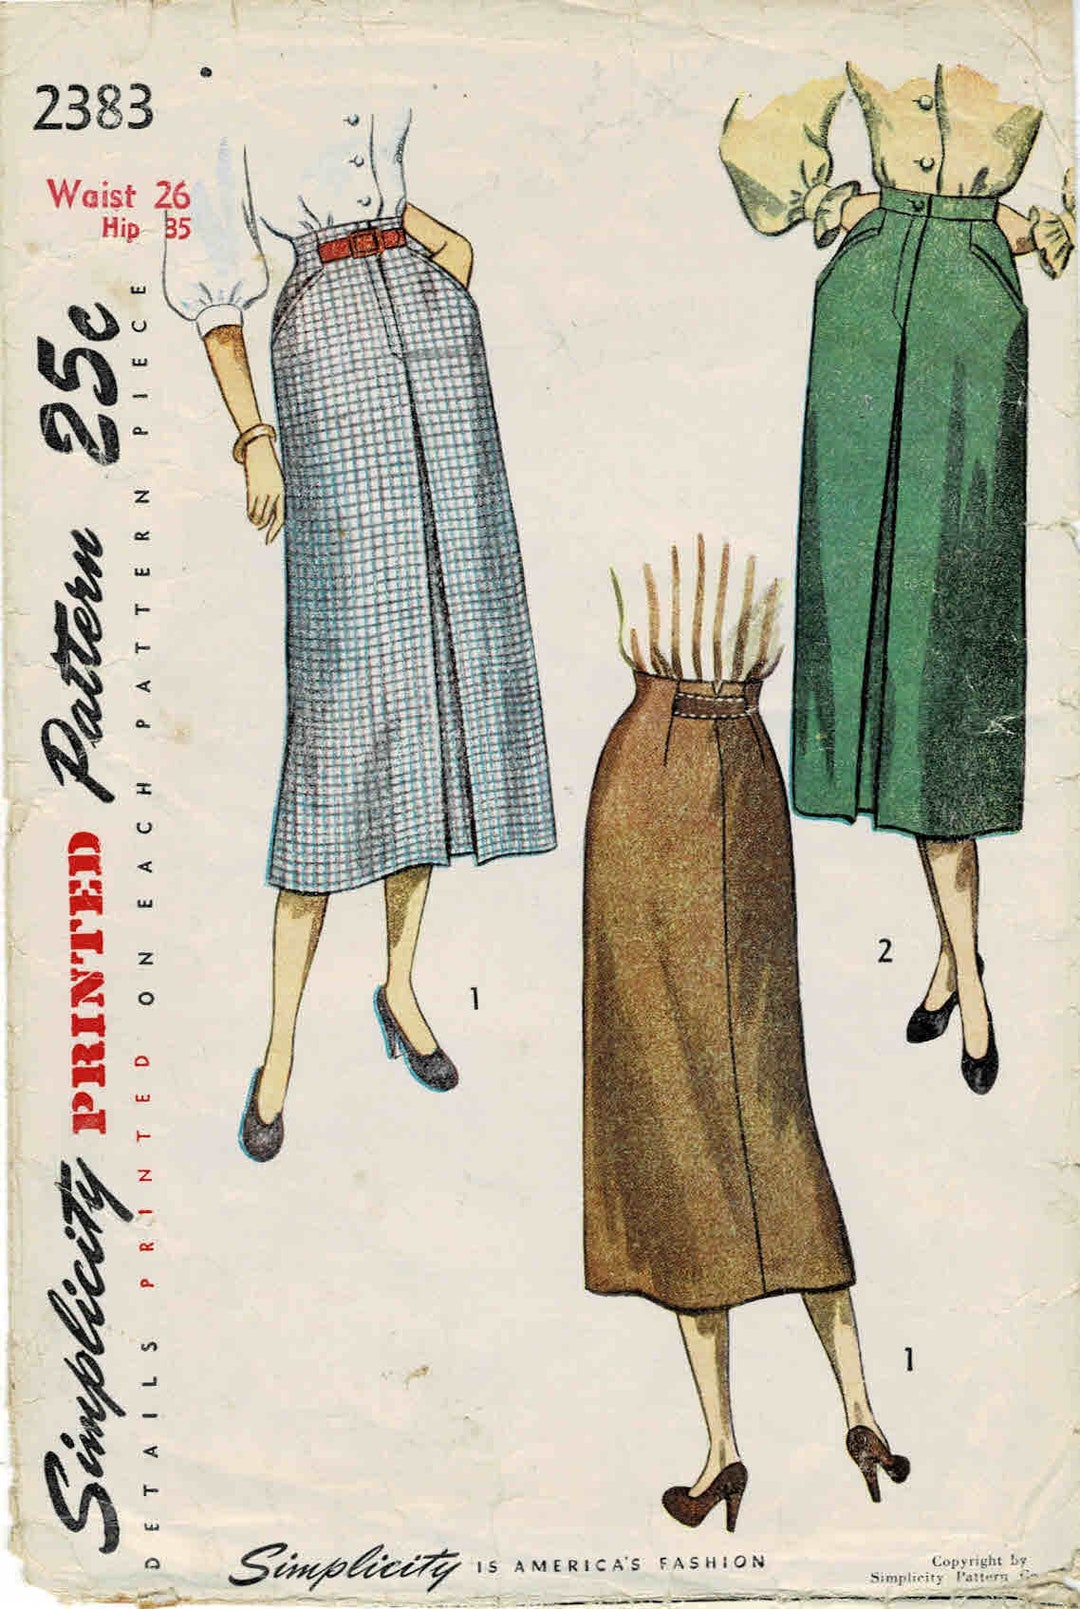 1940s Misses High Waist Slim Skirt With Inverted Pleats - Etsy